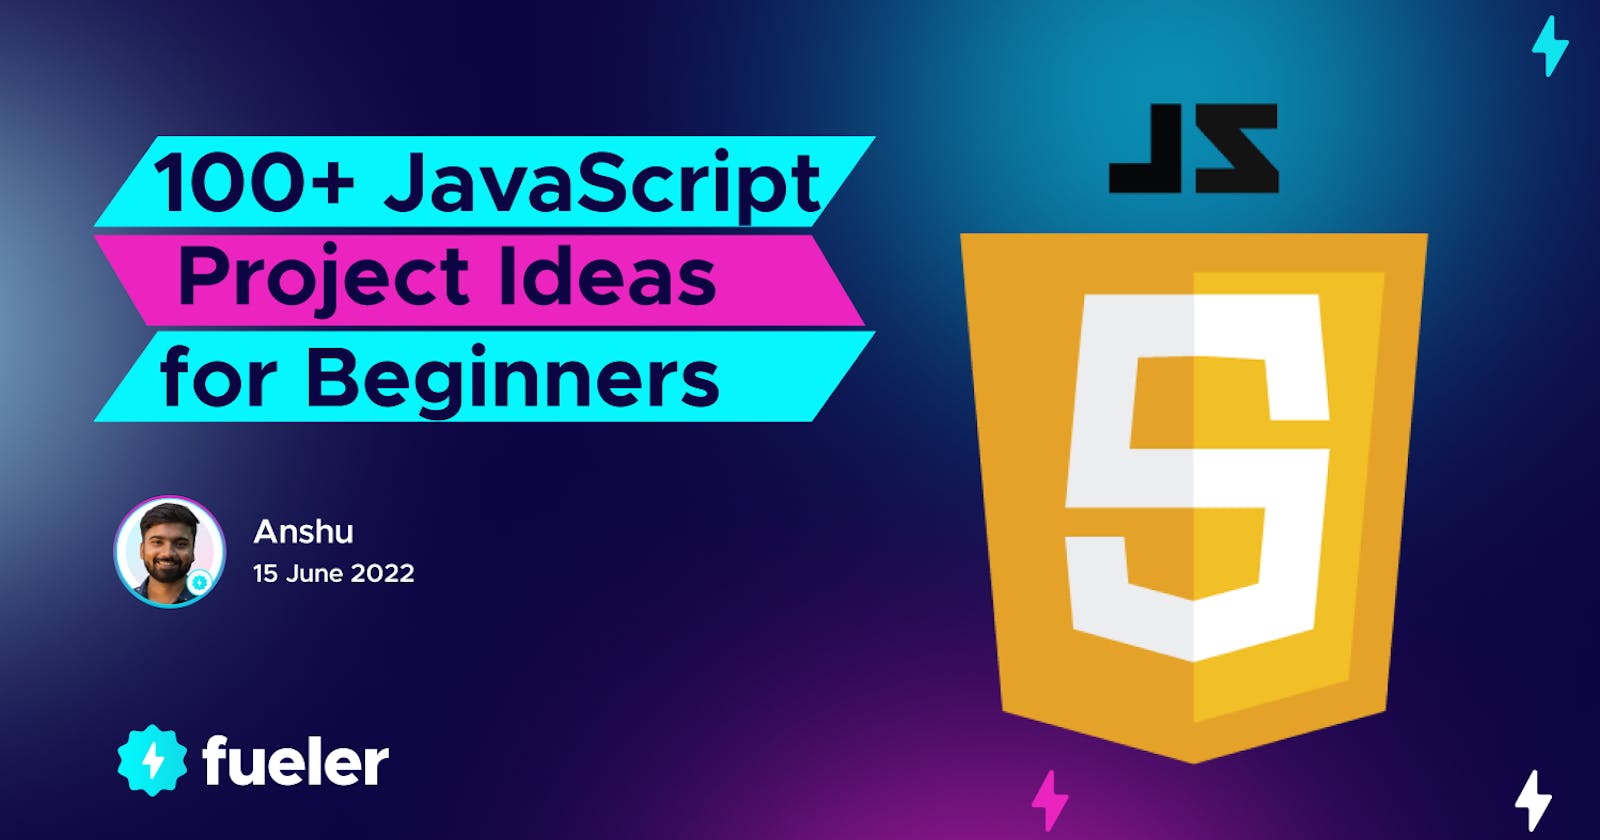 100+ JavaScript Project Ideas for Beginners